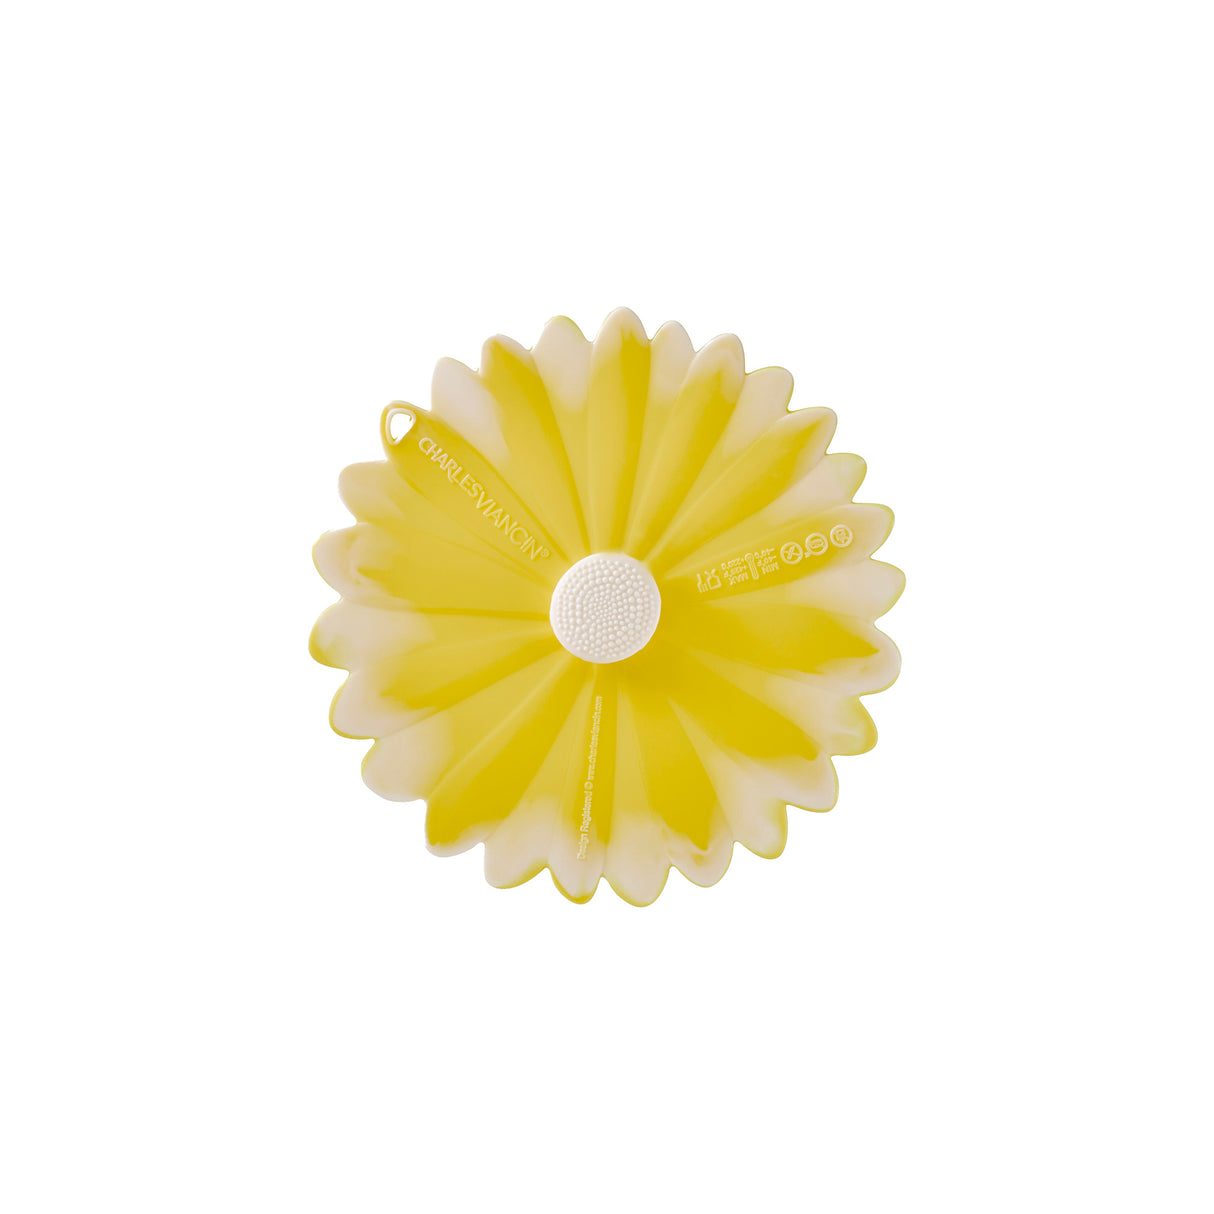 CHARLES-VIANCIN-2514-DAISY-LID-6-YELLOW-WHITE-SILICONE-TOP.jpg